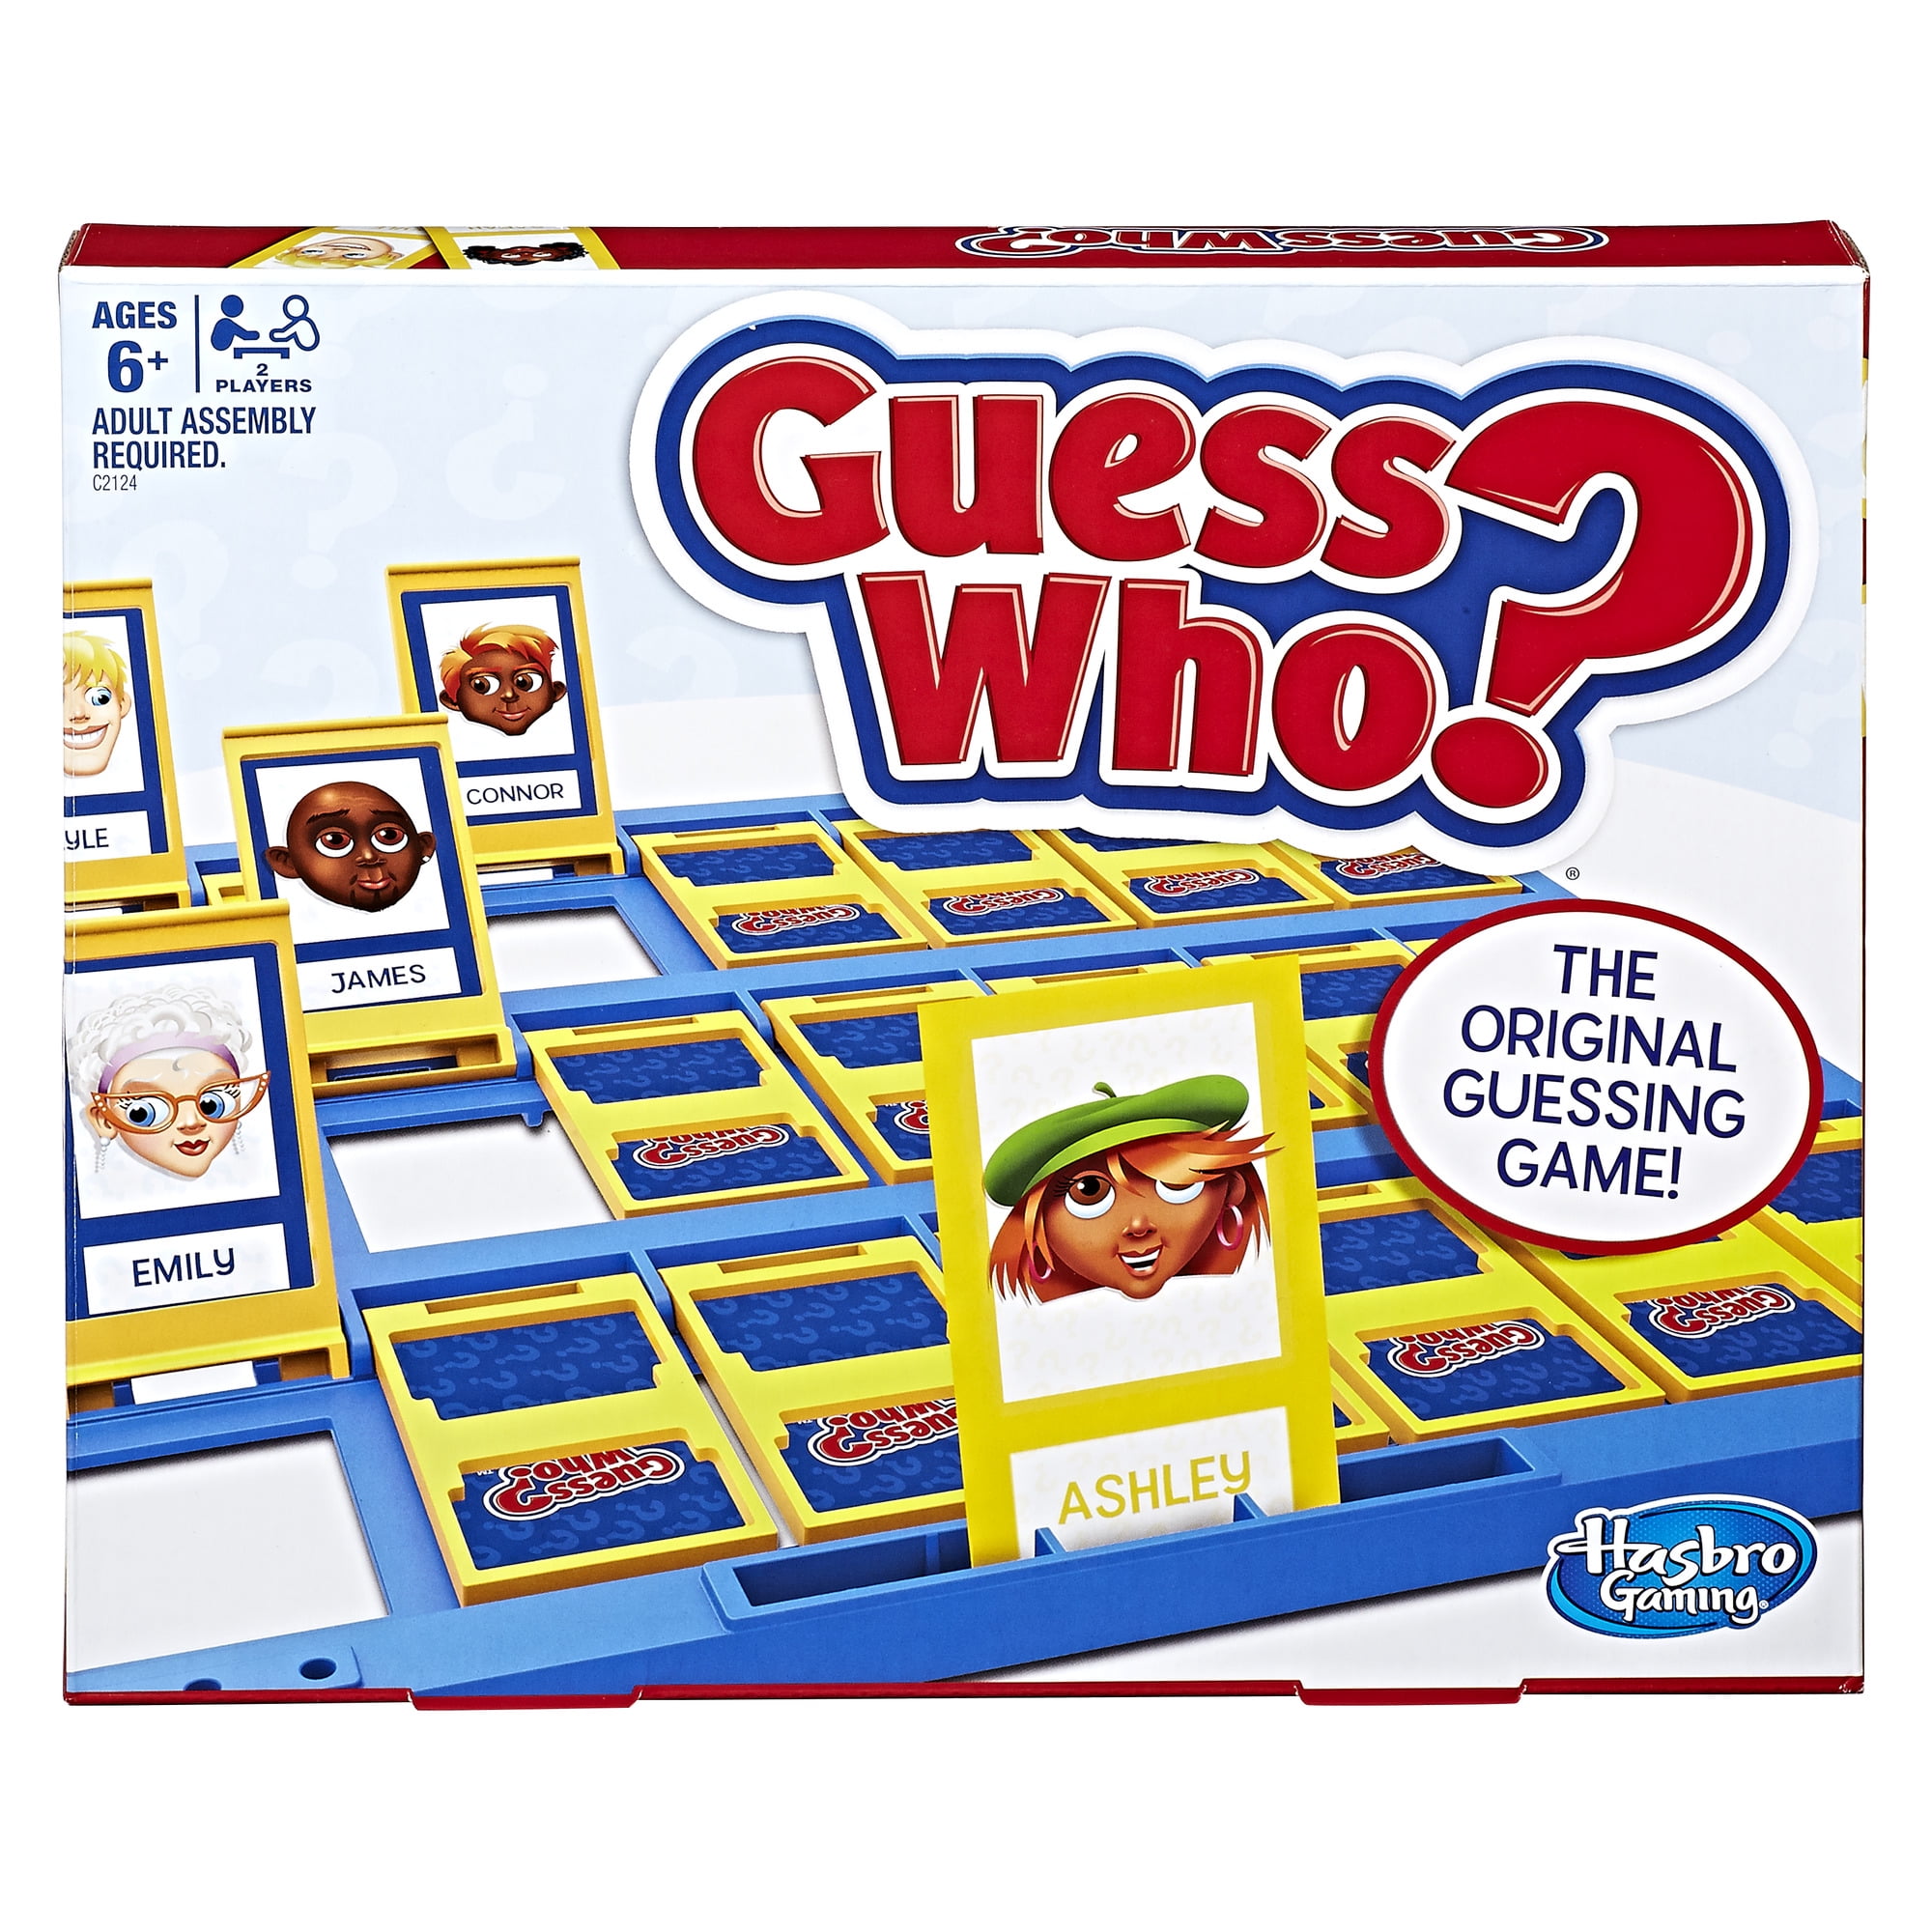 Classic Guess Who? - Original Guessing Game, Ages 6 and up - Walmart